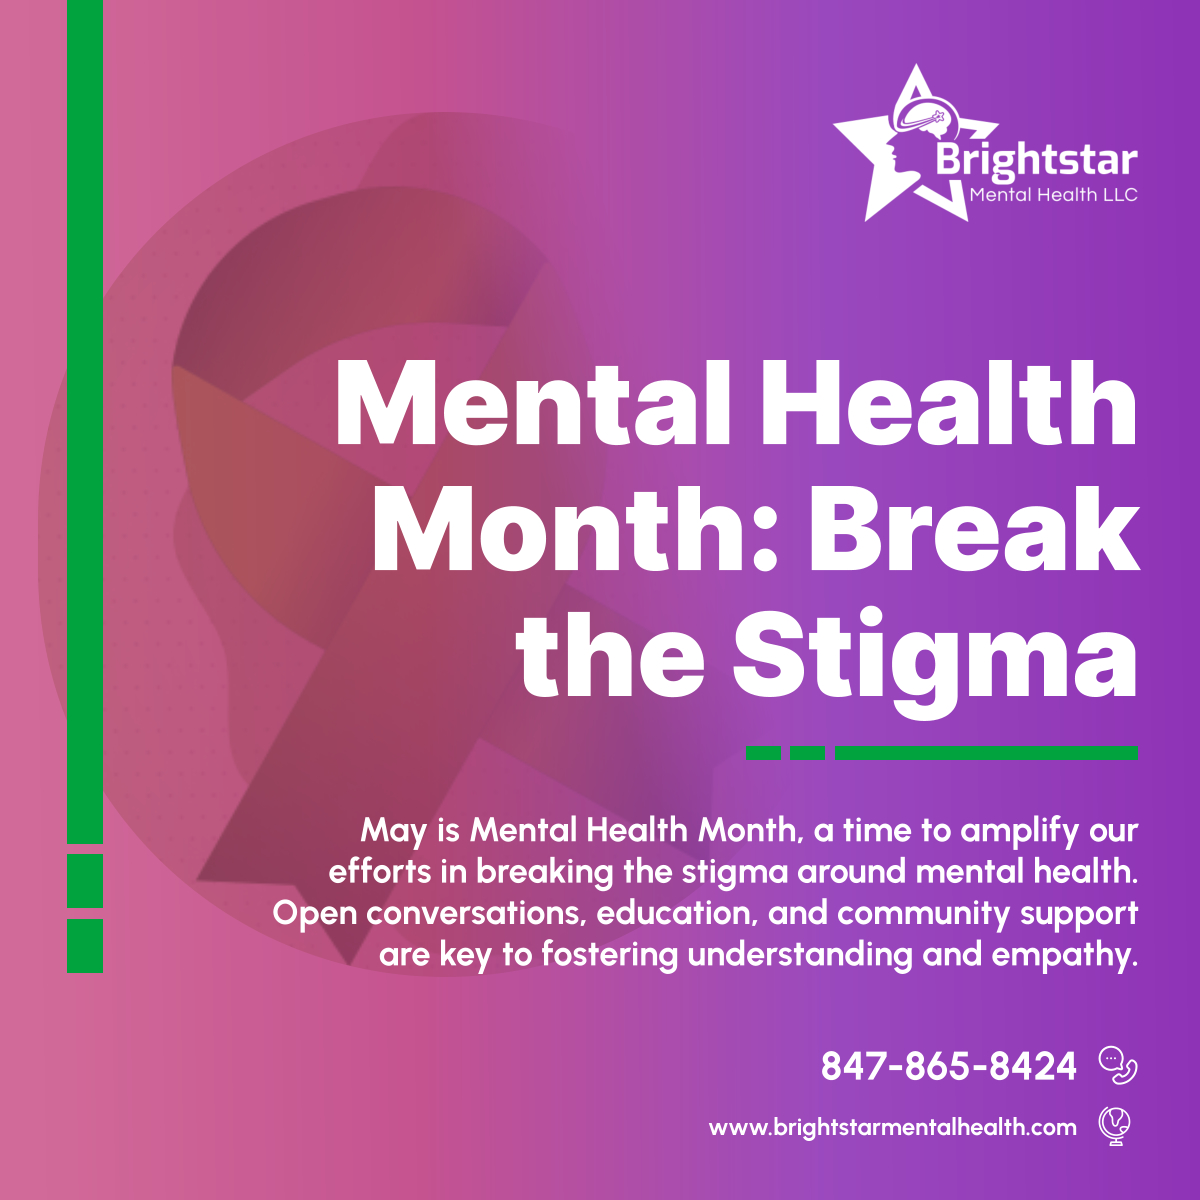 This Mental Health Month, let’s unite to shatter the stigma surrounding mental health issues. By talking openly and supporting one another, we can create a more...

Read more:  instagram.com/p/C6q3oh7INCU/

#ChicagoTherapy #IllinoisTherapist #MentalHealthMonth #BrightstarMentalHealth